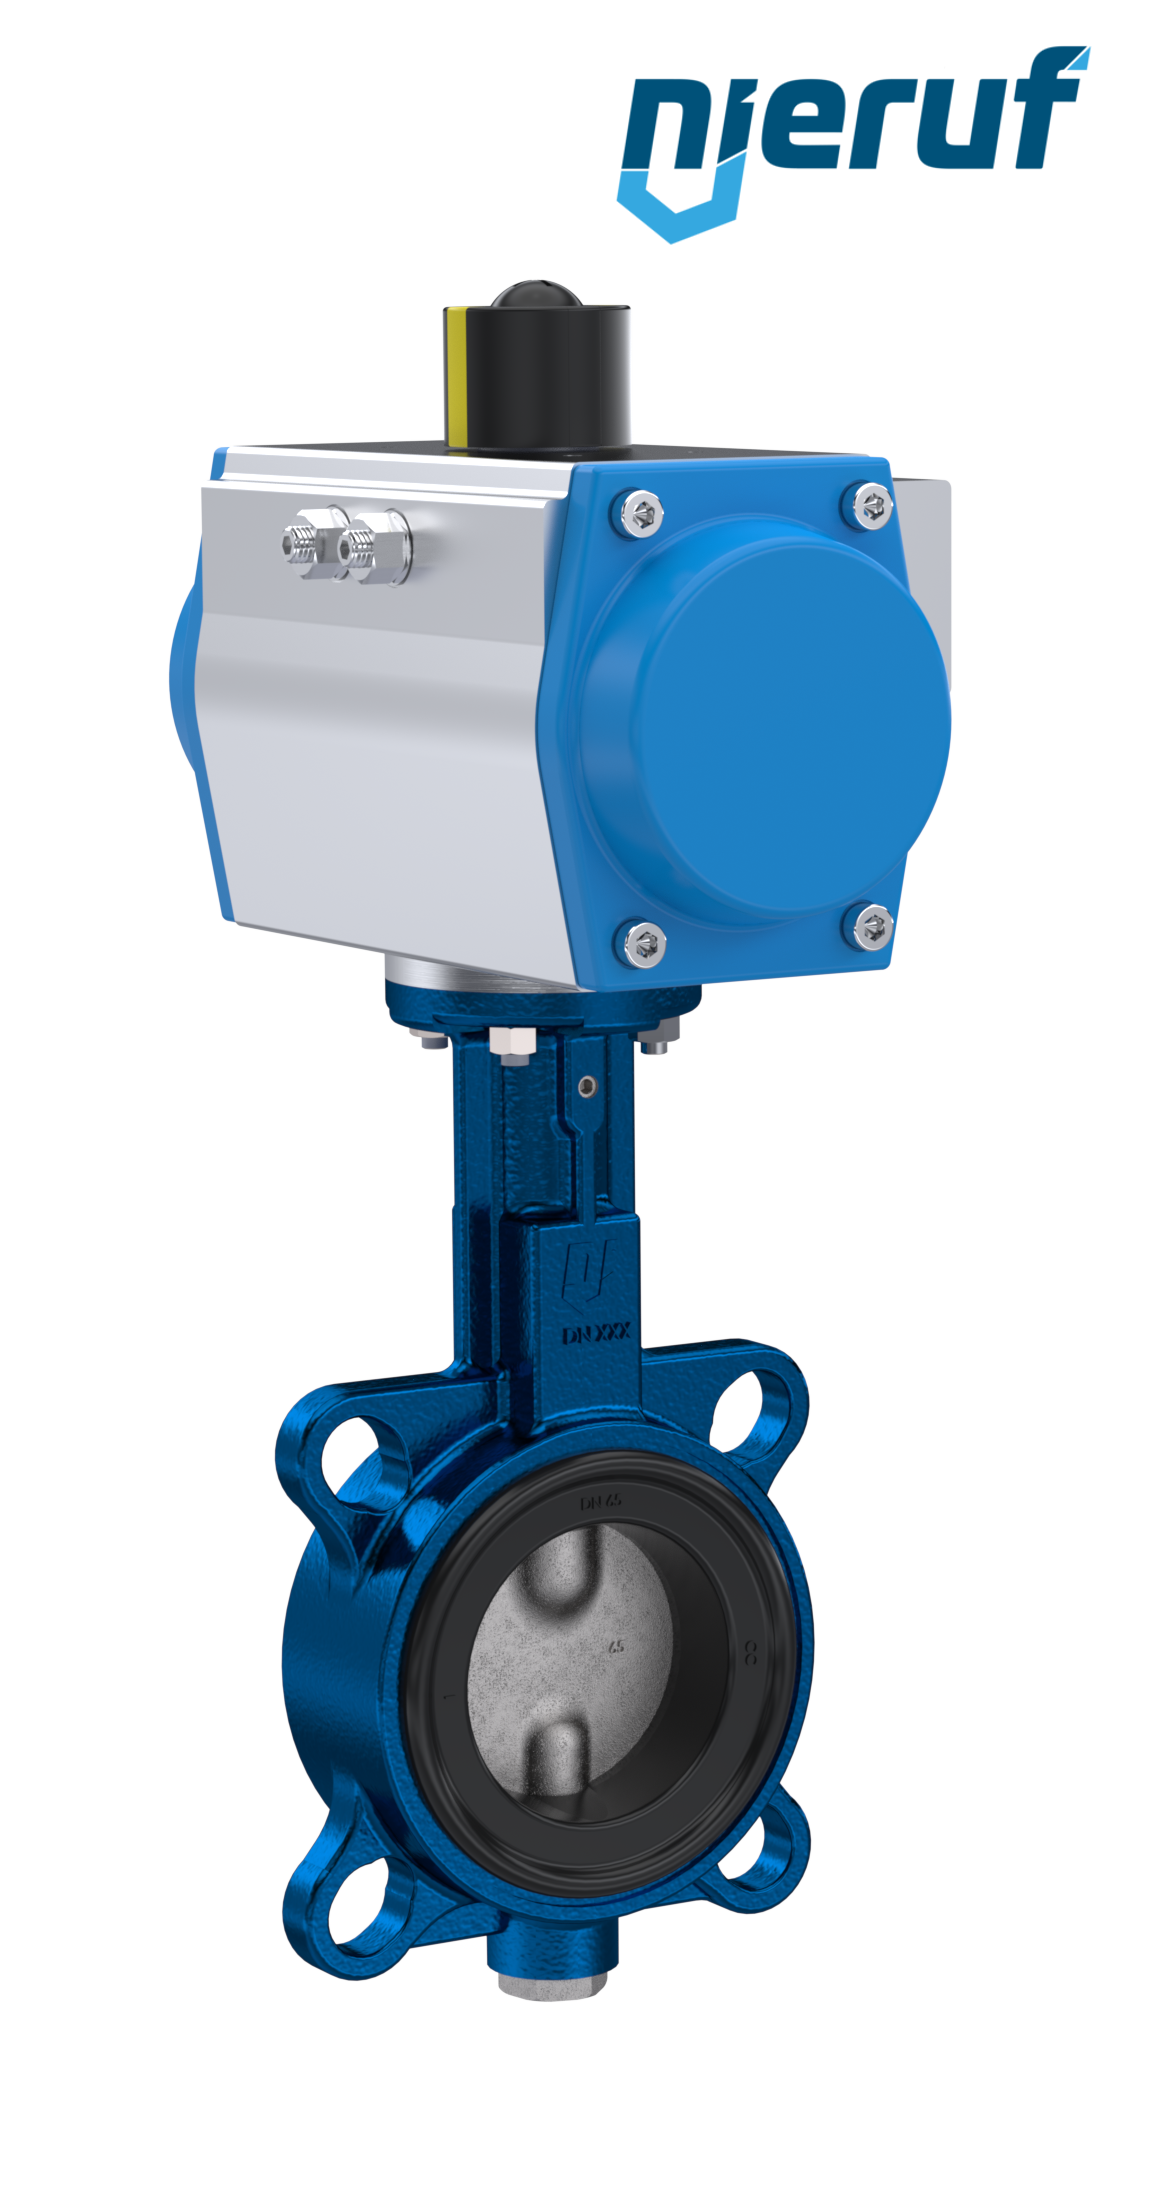 Butterfly valve DN 32 AK01 EPDM DVGW drinking water, WRAS, ACS, W270 pneumatic actuator single acting